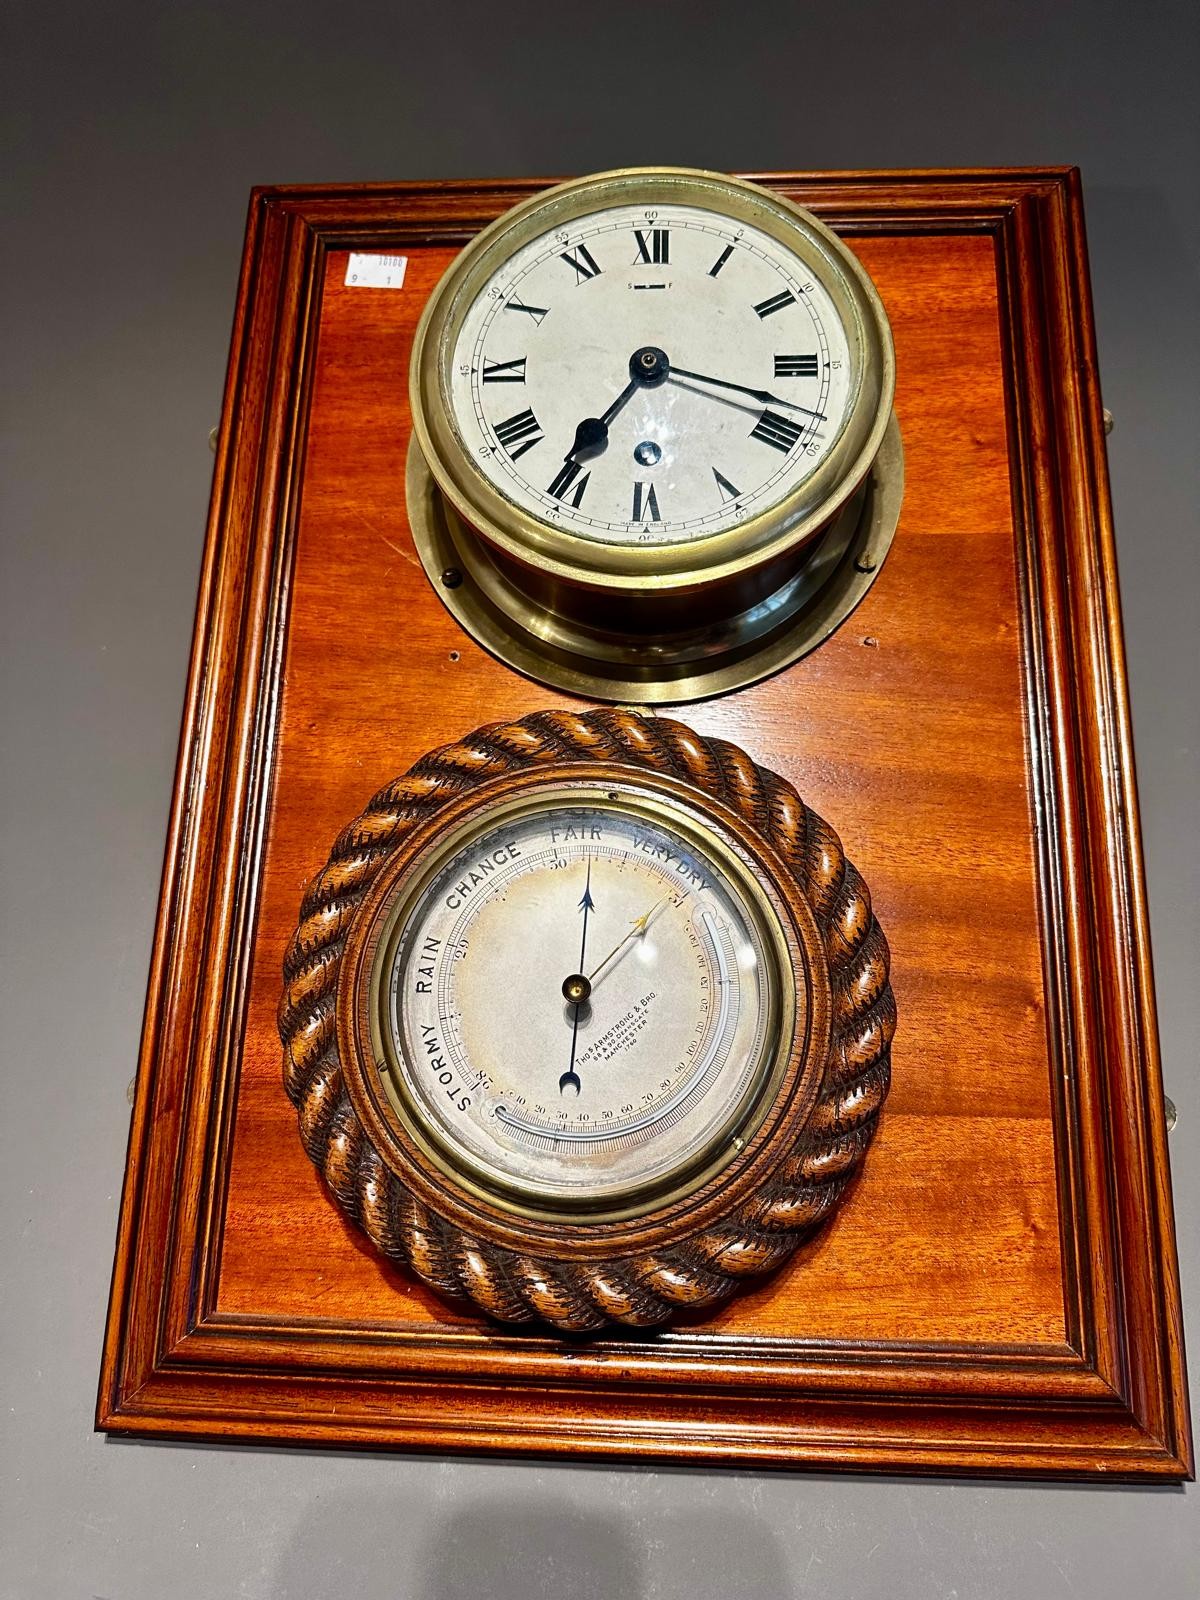 A mounted brass Ship's clock and wooden mounted barometer together with a Modern brass and green